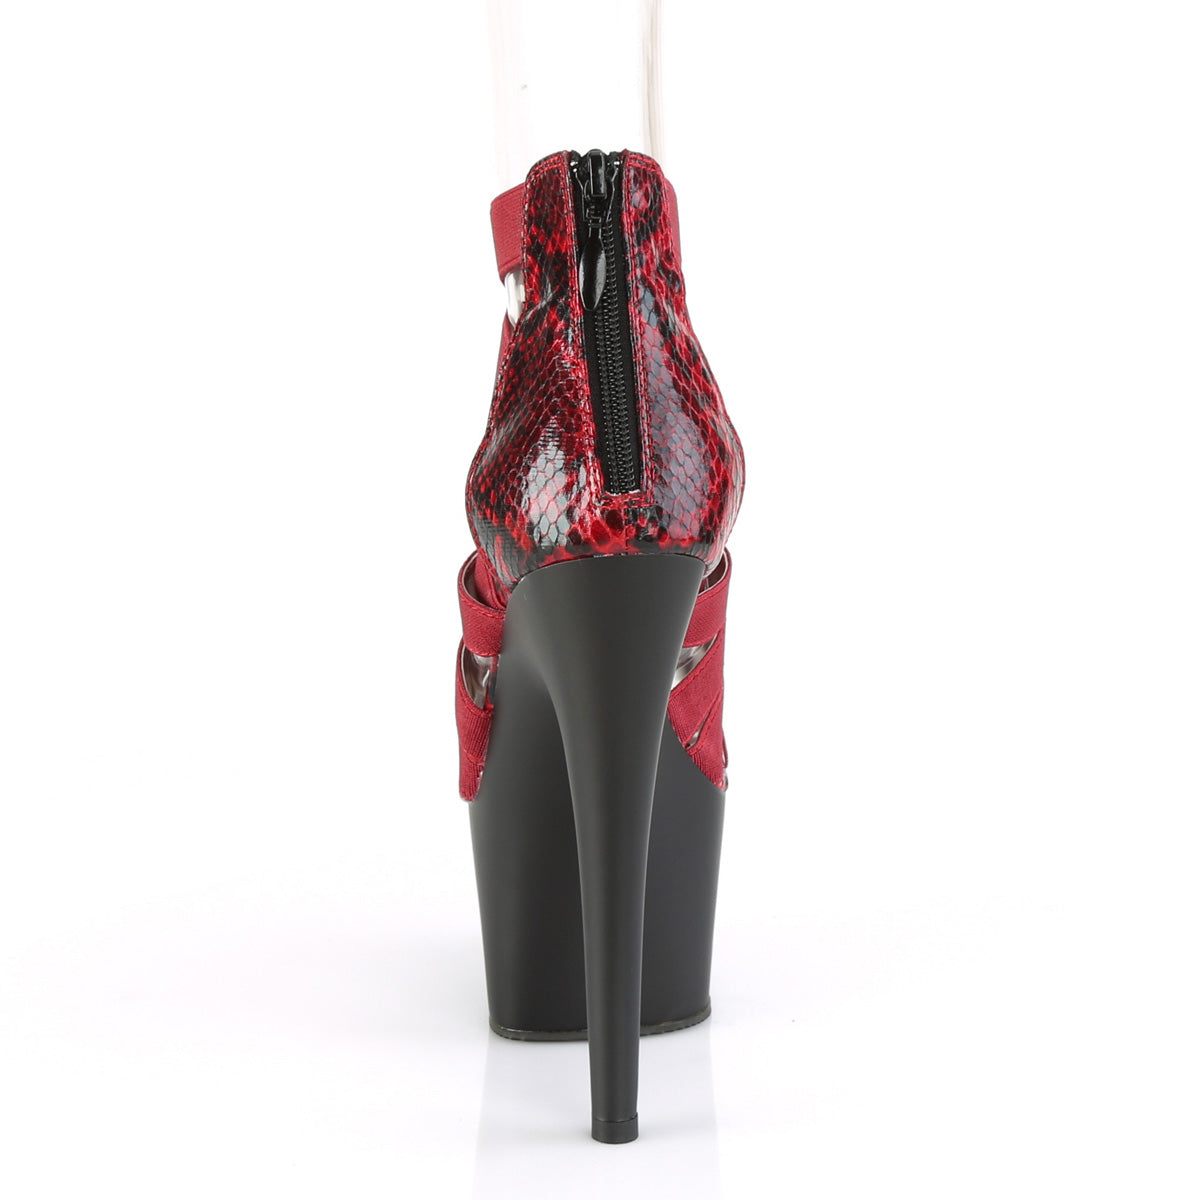 ADORE-748SP 7" Heel Wine Snake Print Strippers Sandals-Pleaser- Sexy Shoes Fetish Footwear